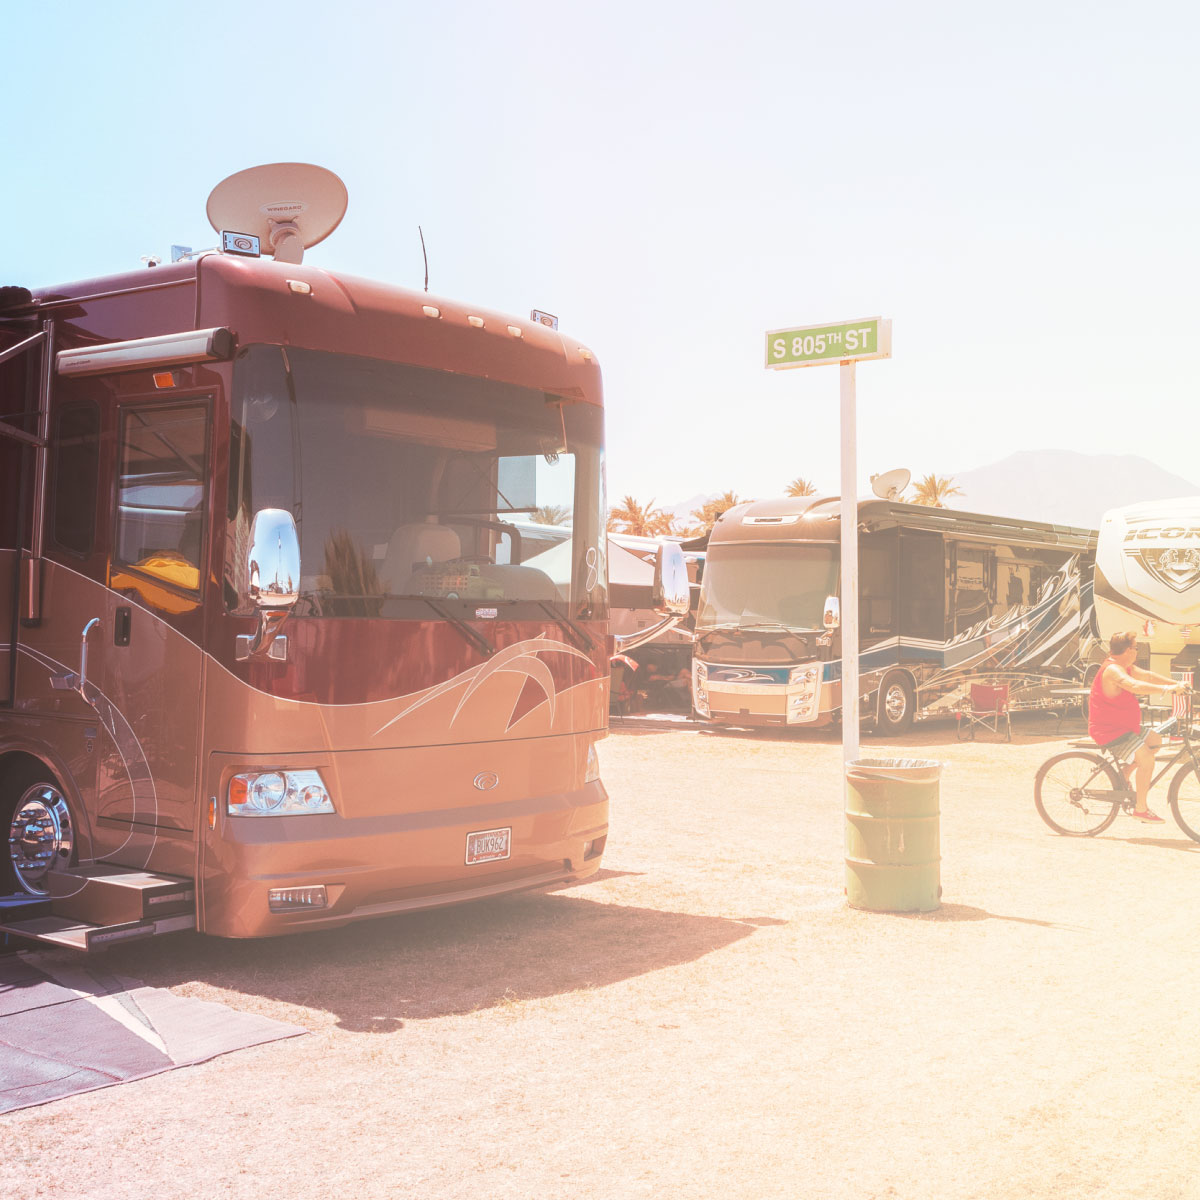 RV at Stagecoach phtoto